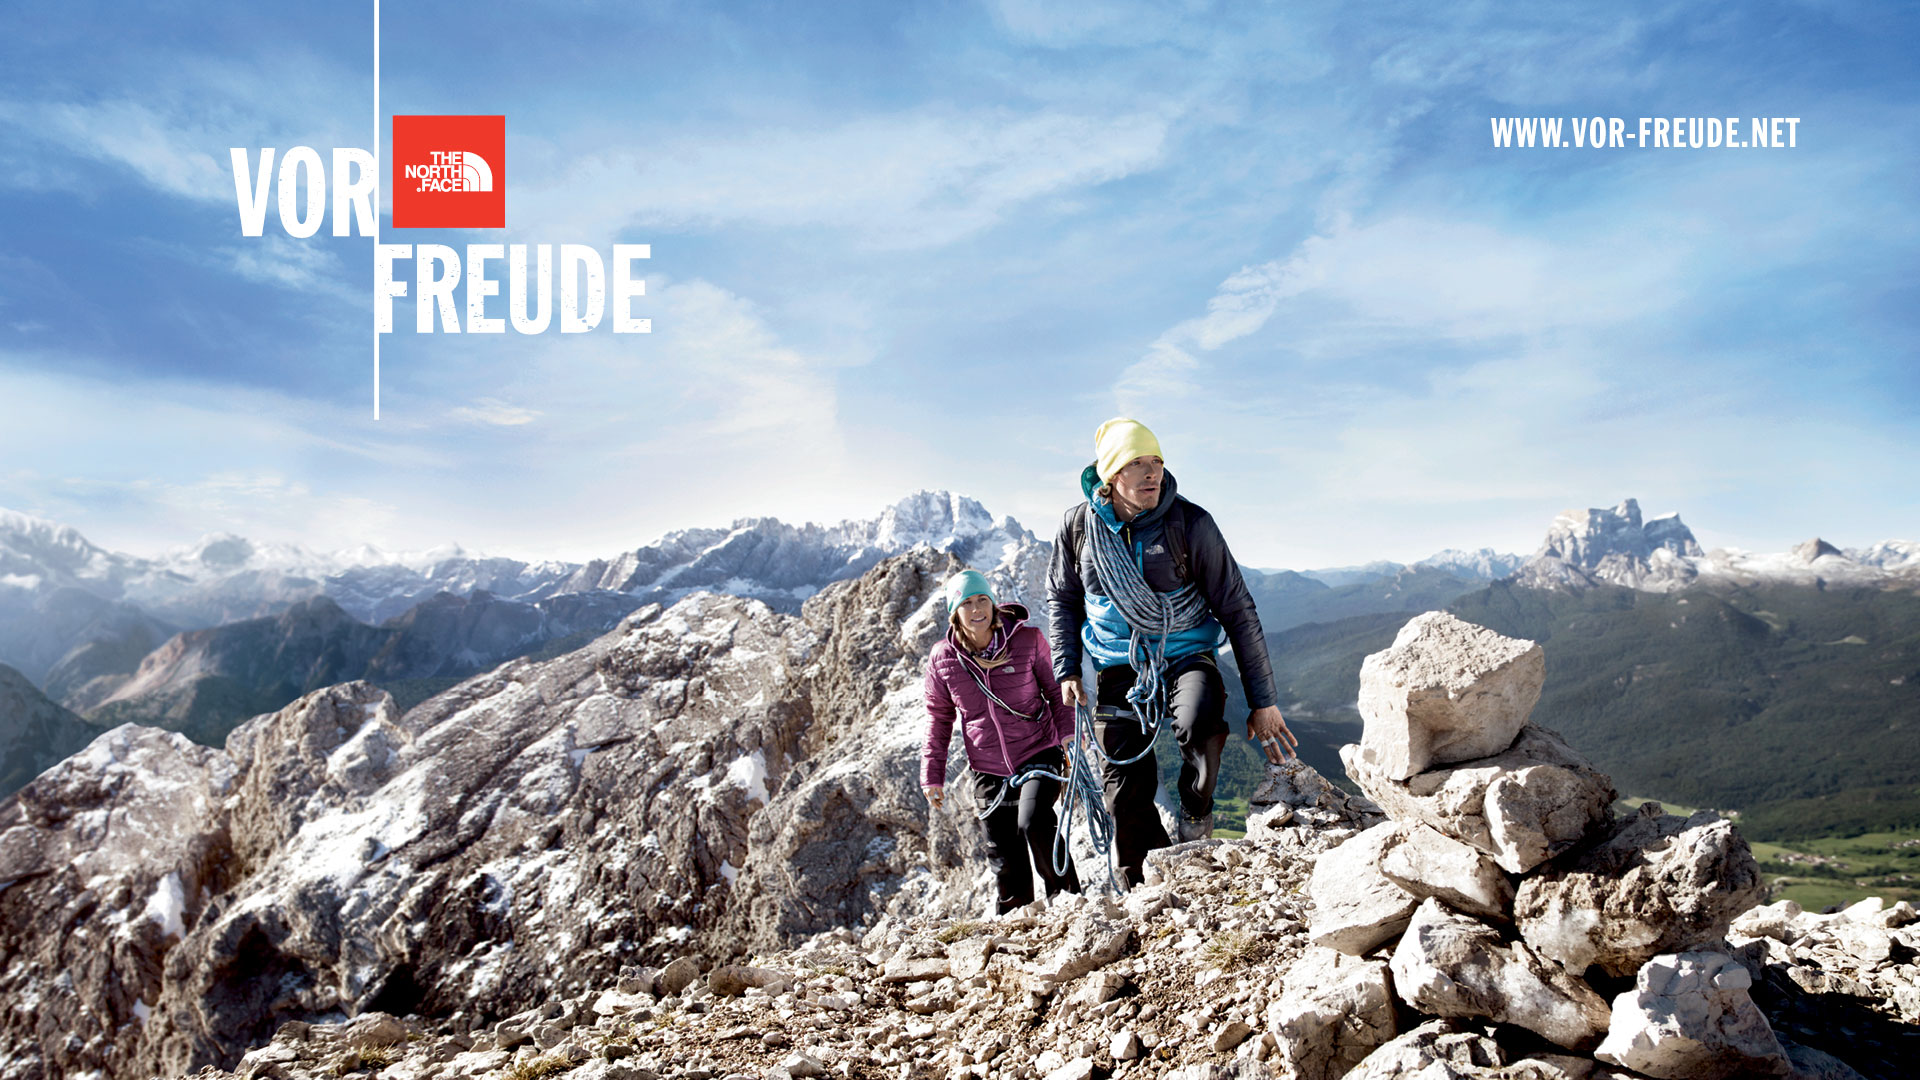 The North Face Wallpaper - The North Face - HD Wallpaper 